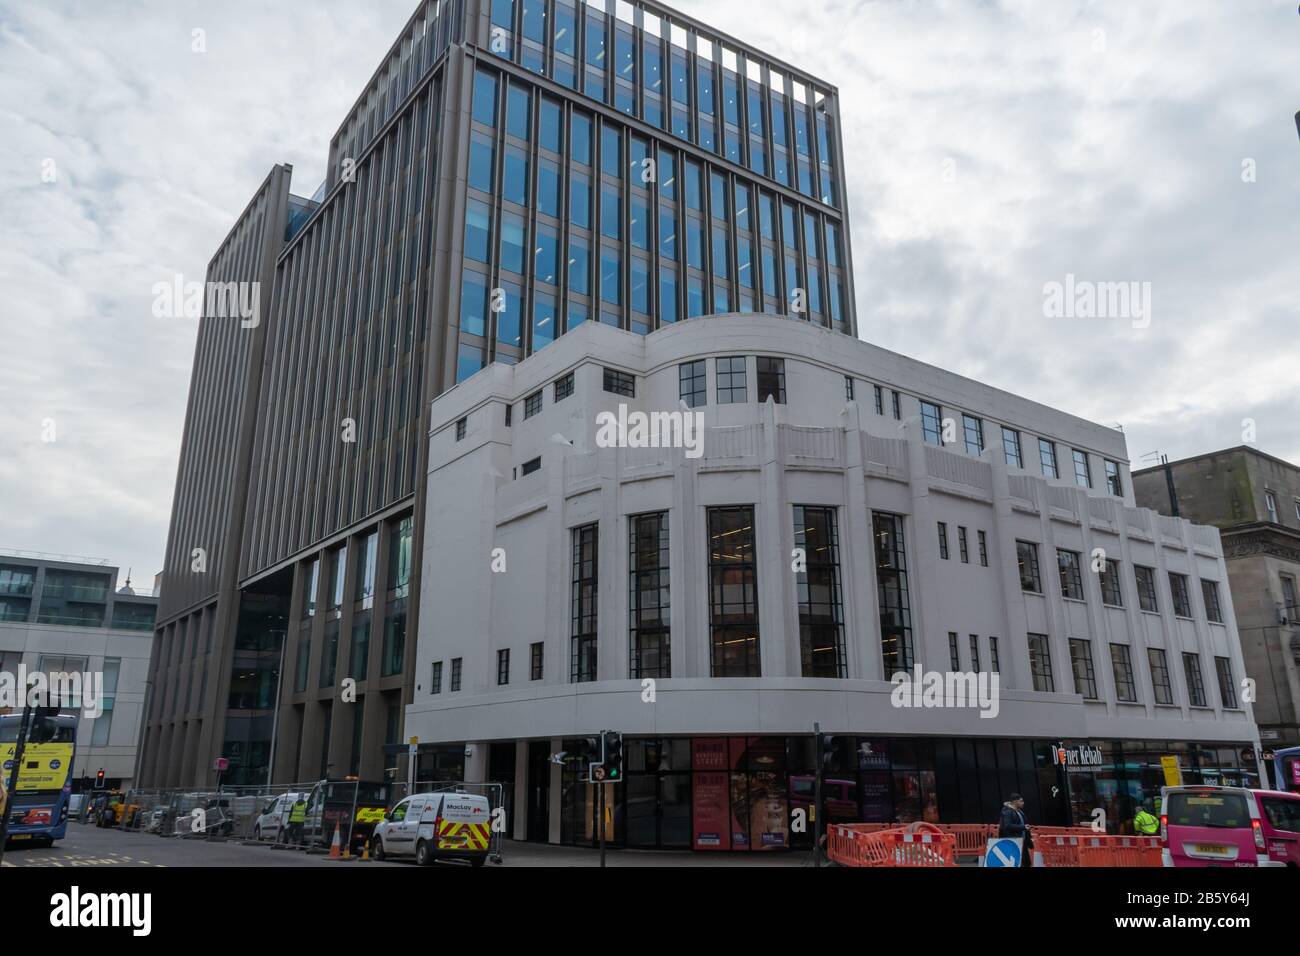 The old Odeon cinema on Renfield Street which has now been refurbished and converted into offices and restaurant space, behind is a new office block Stock Photo